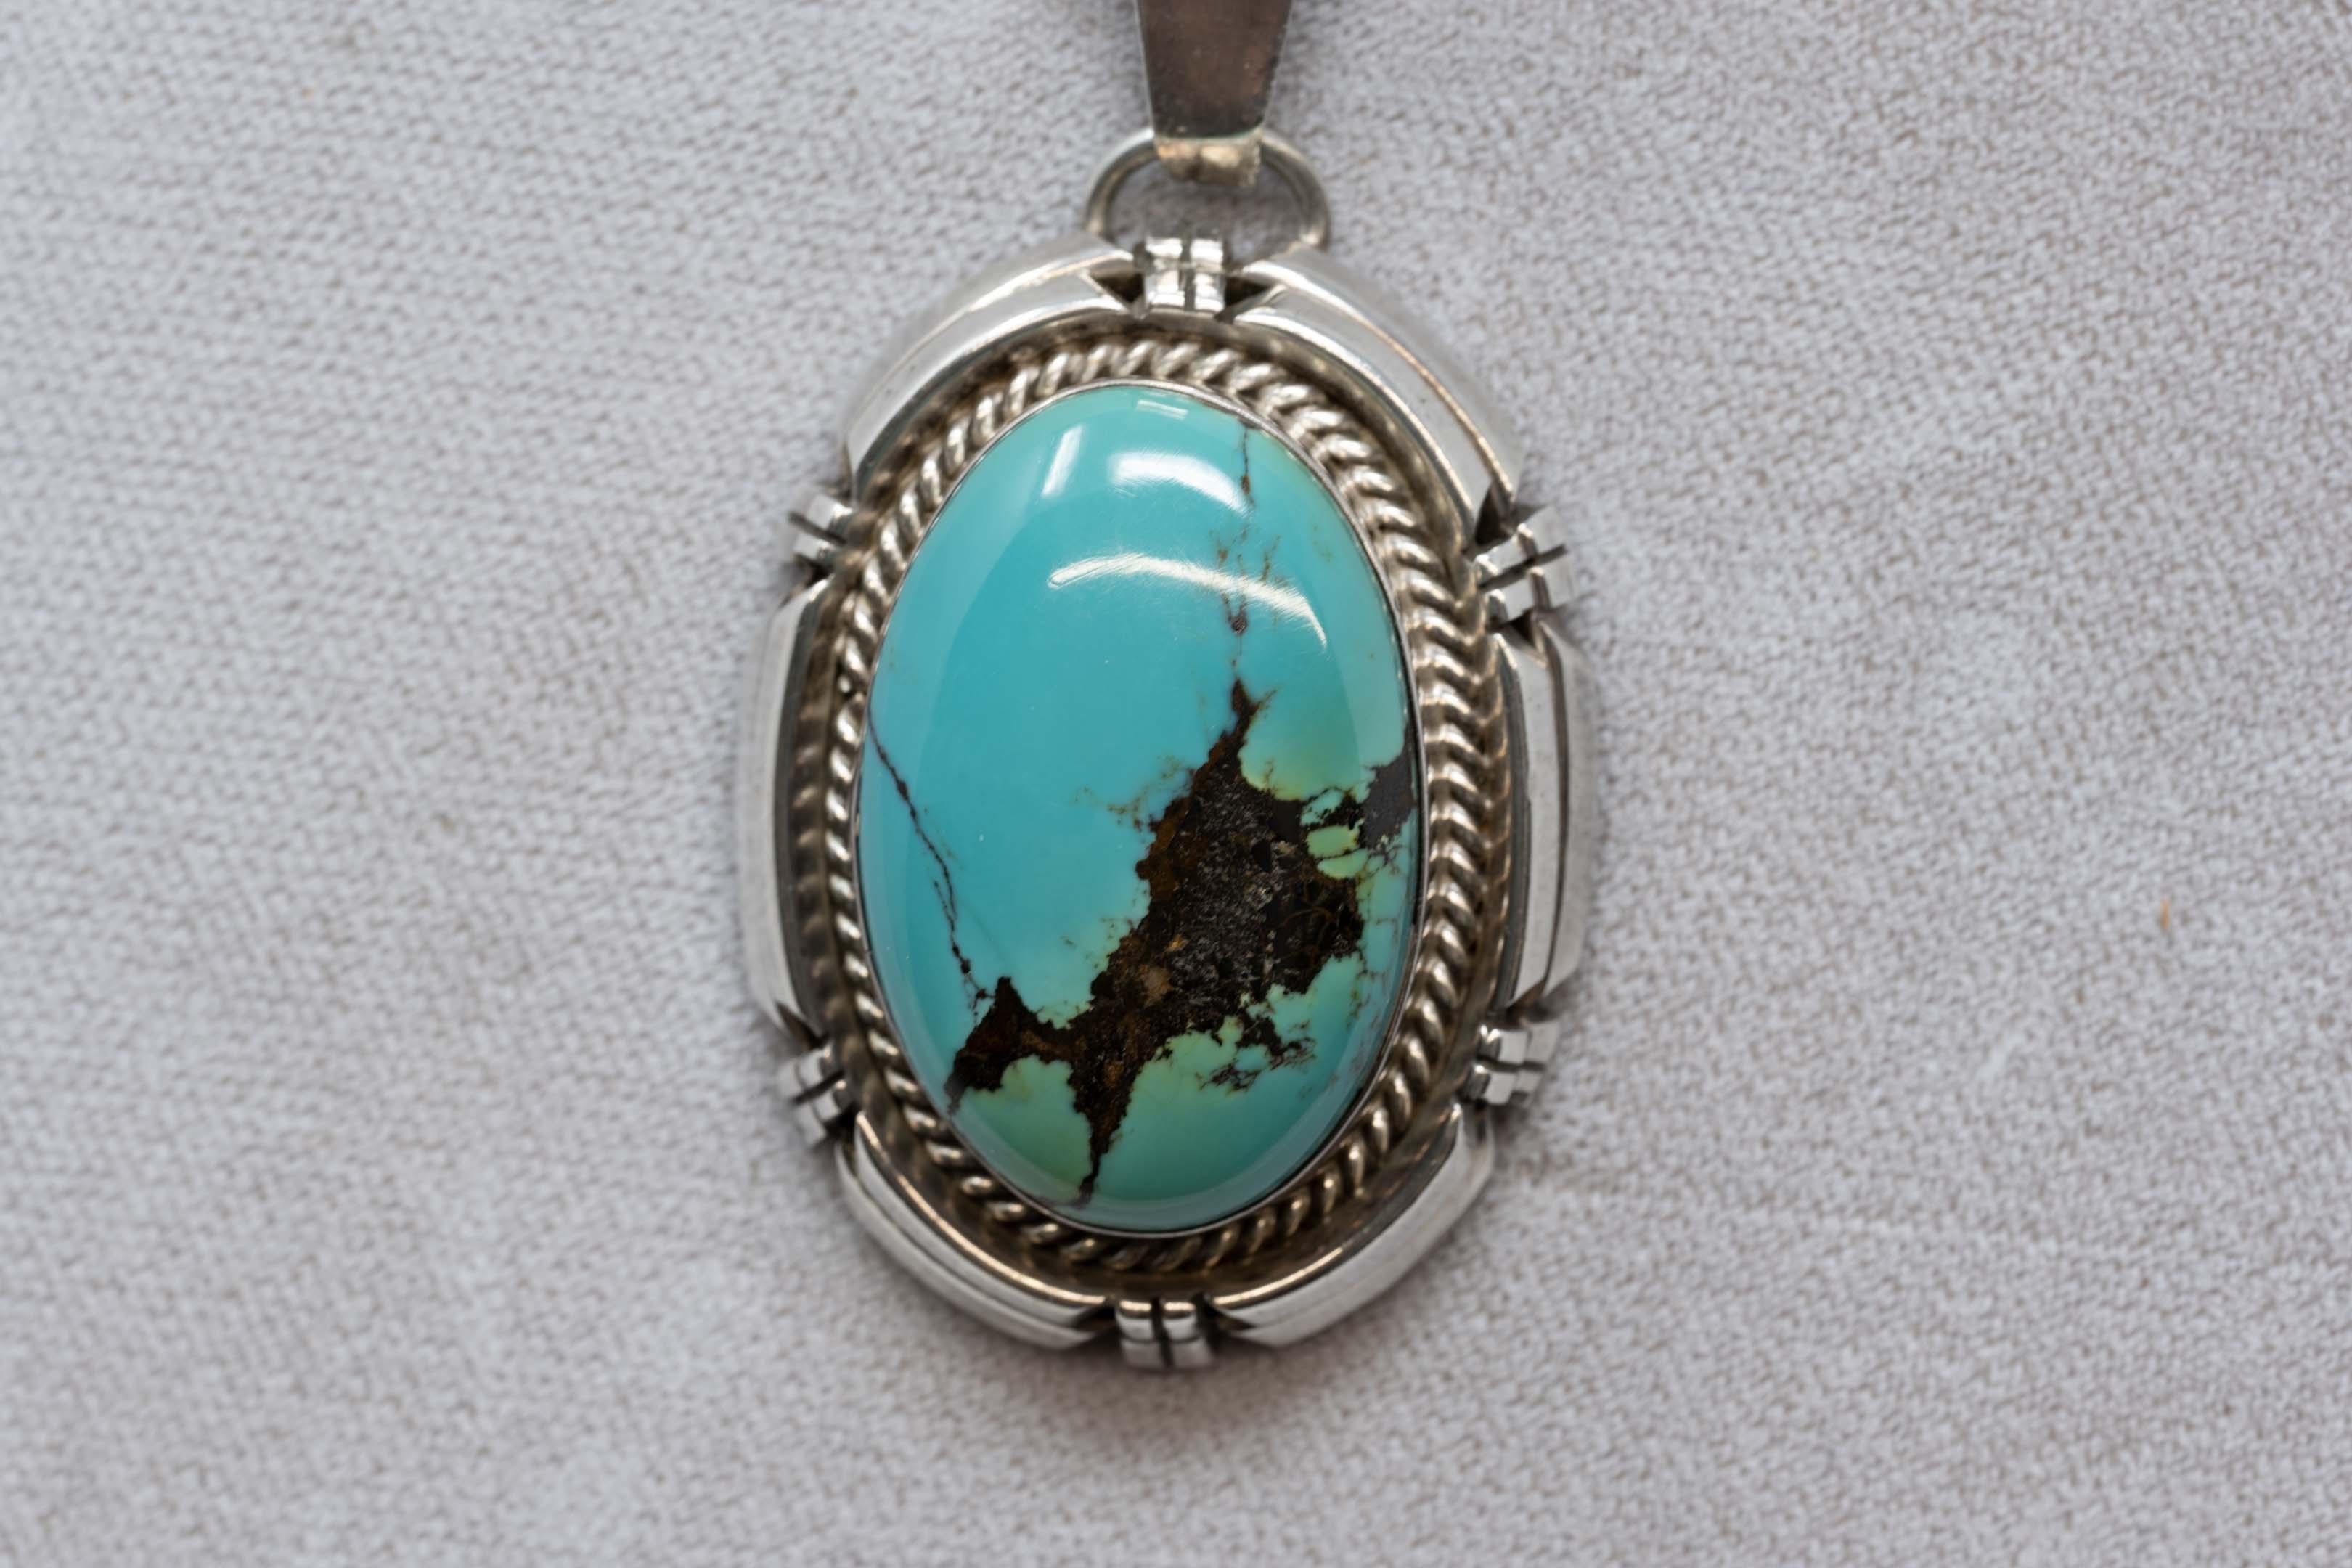 Sterling silver turquoise pendant signed and made by Rita Touchine, Navajo silversmith. The stone measures 32 x 22 mm, the pendant measures 45 x 33 mm without the loup. Made in the USA, late 20th century.